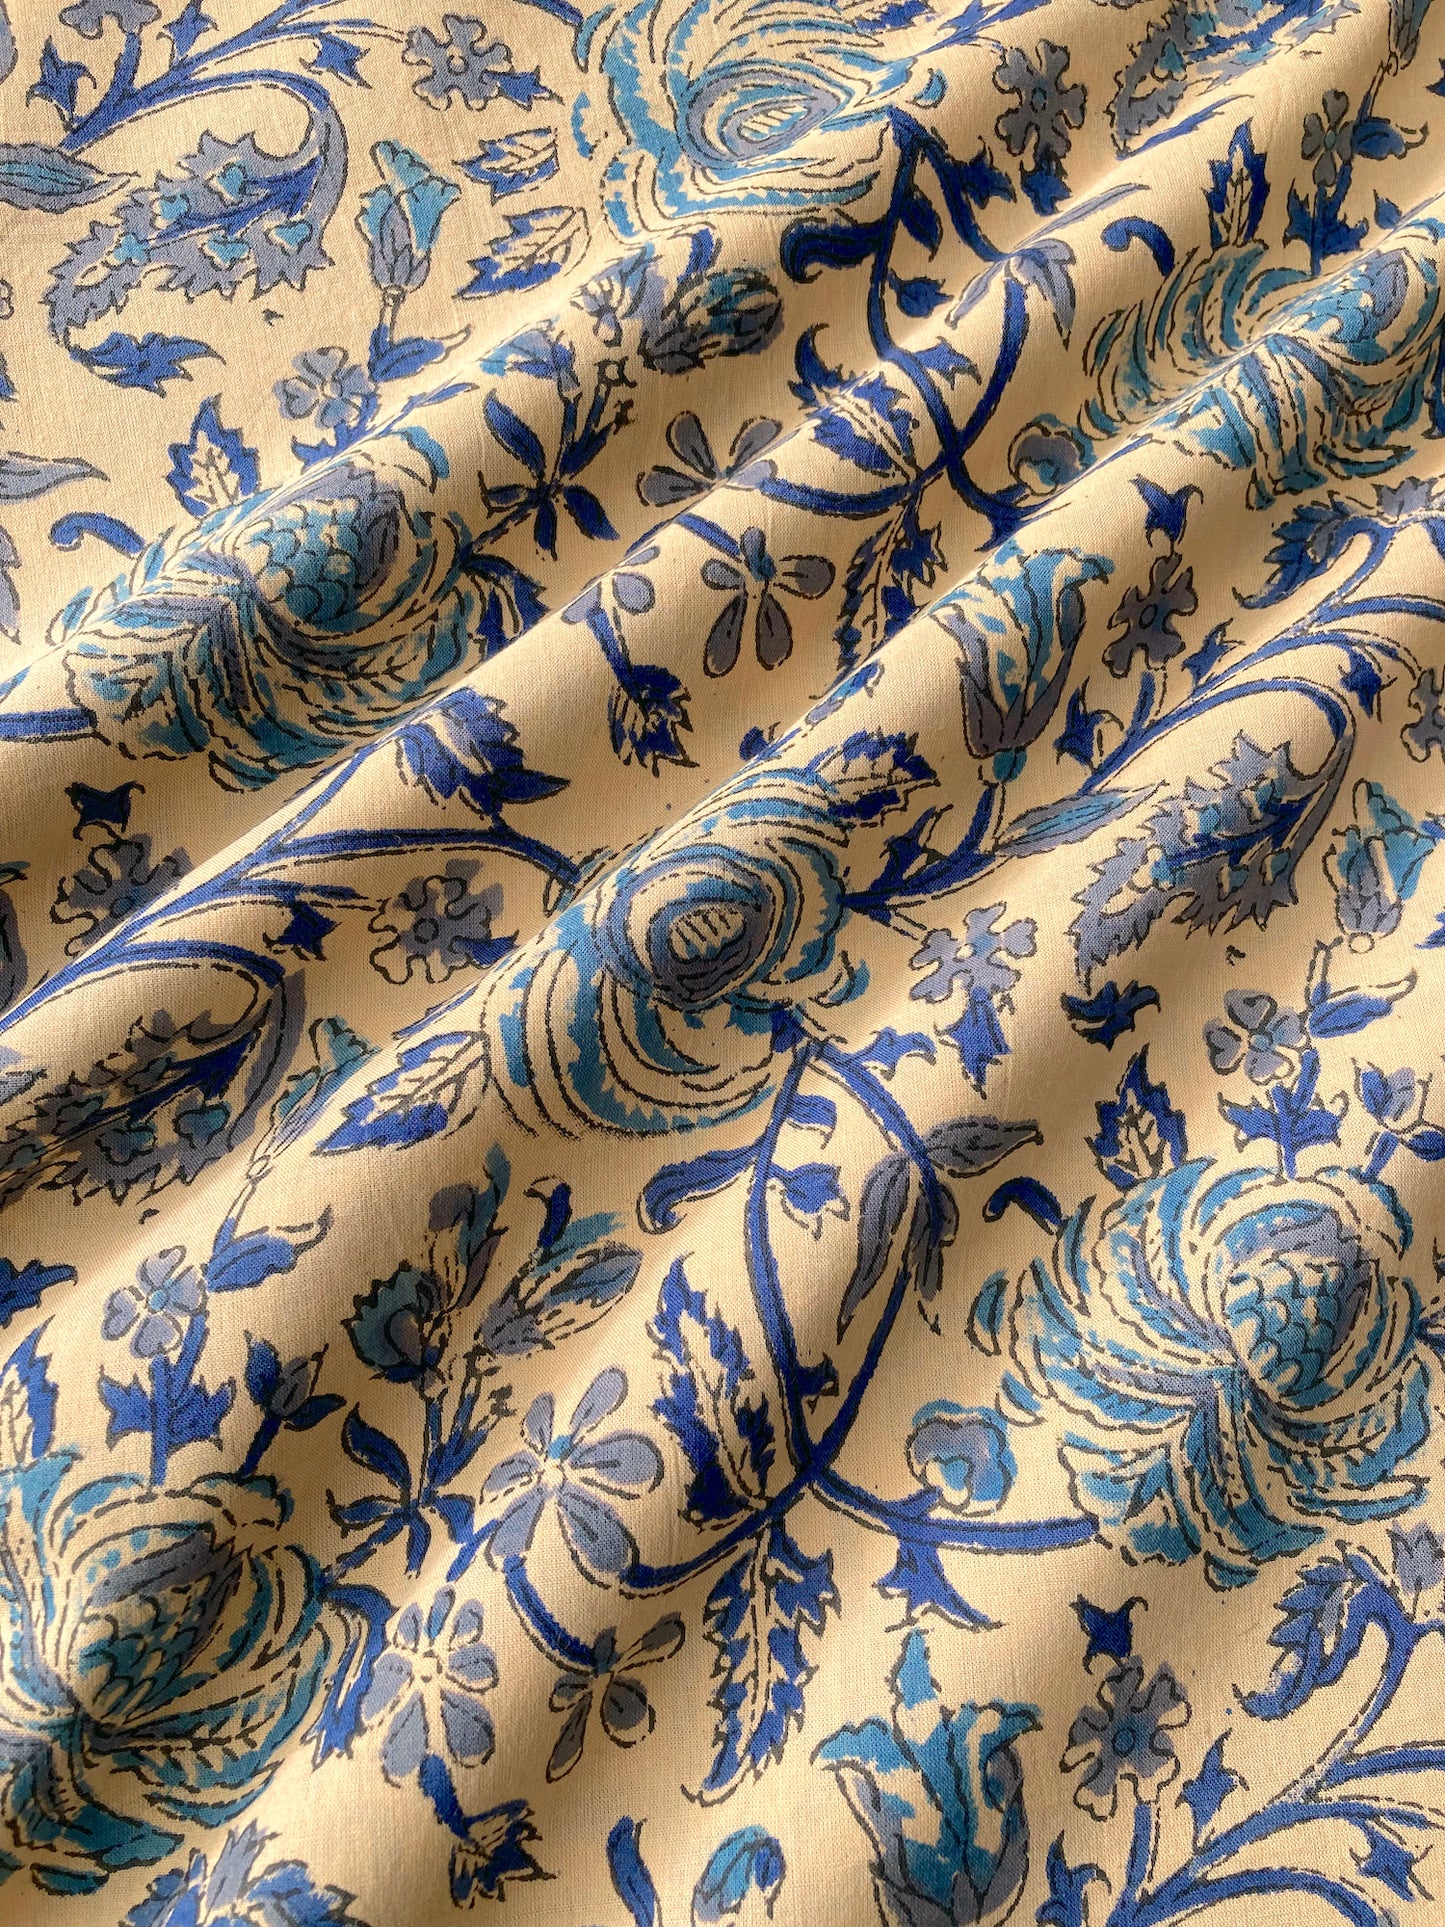 Hand Block Printed Cotton Fabric Natural Beige #185-19